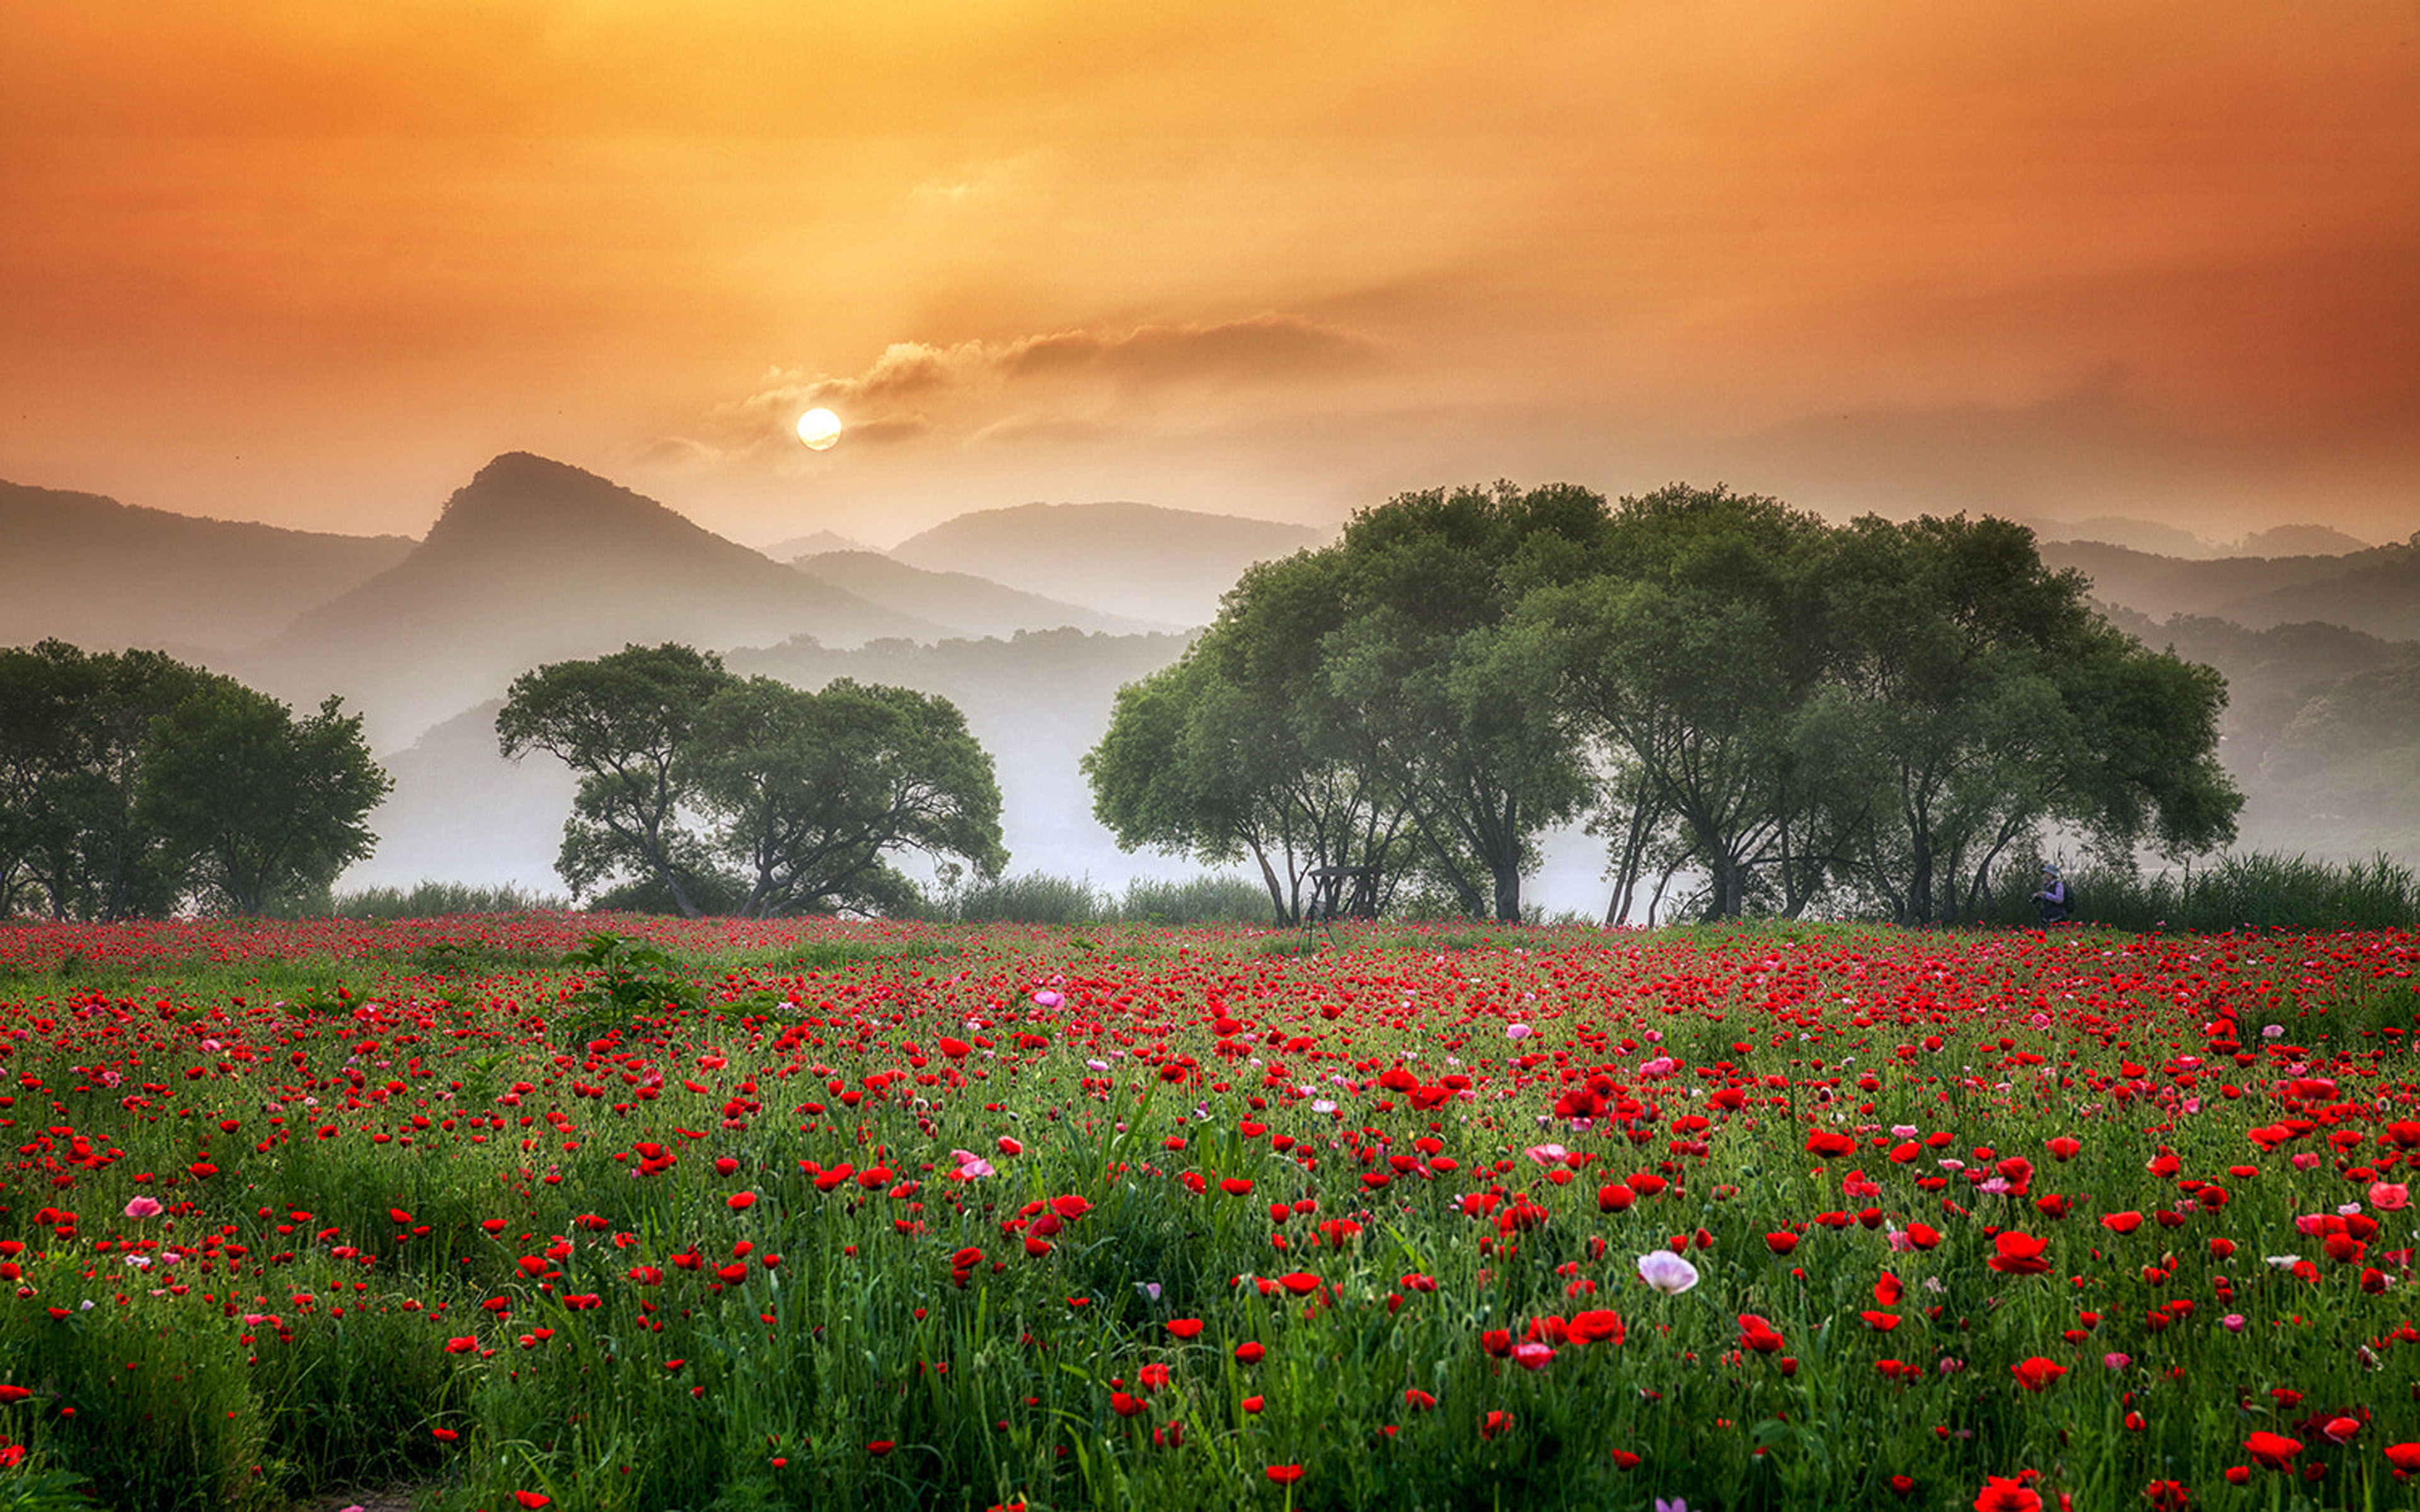 Flowers Fog And Sunrise Meadow With Red Poppies Willow Trees Hd